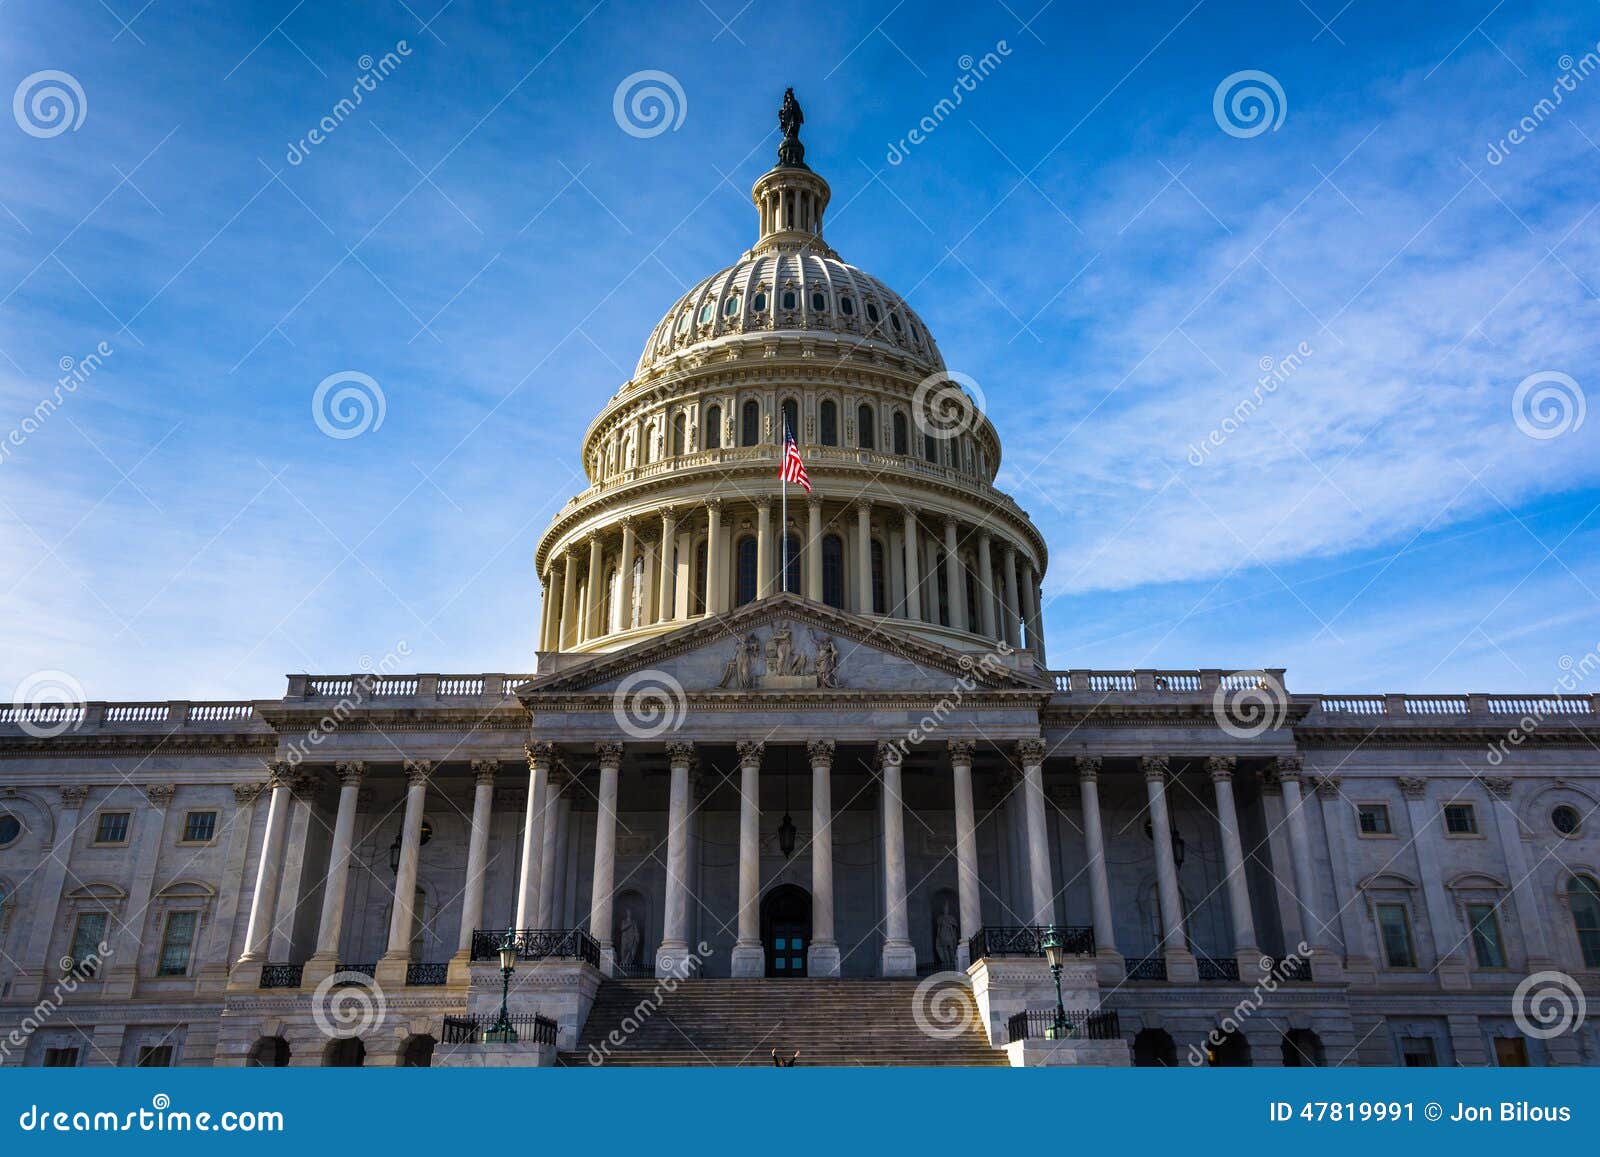 the united states capitol, in washington, dc.